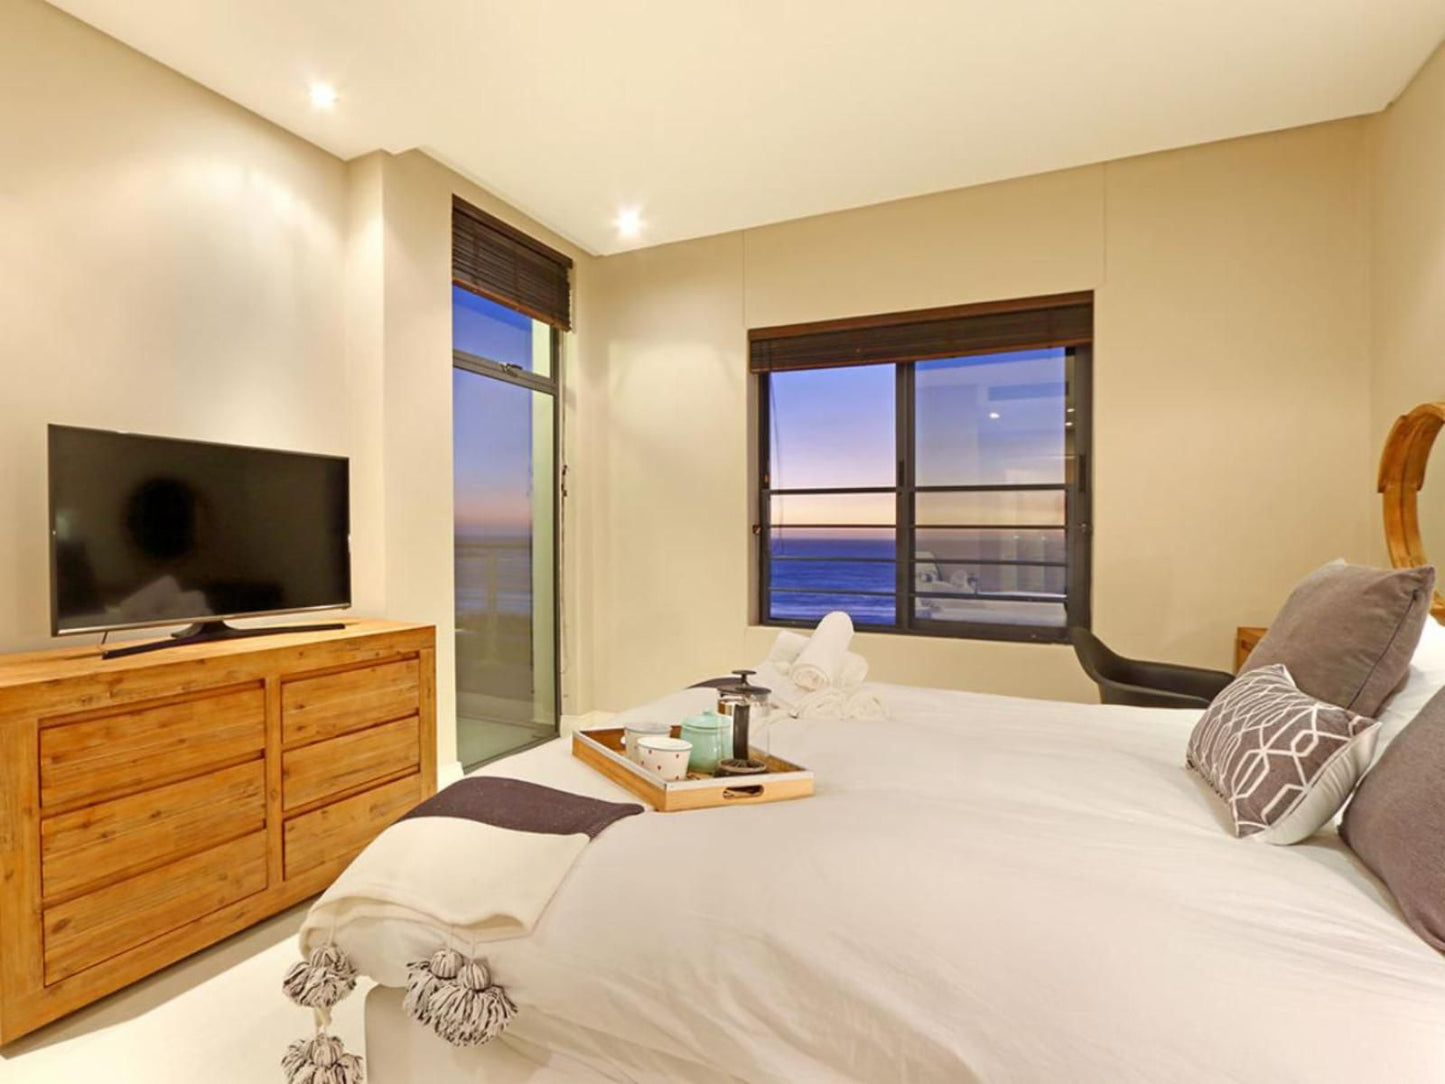 Eden On The Bay 277 By Hostagents Big Bay Blouberg Western Cape South Africa Bedroom